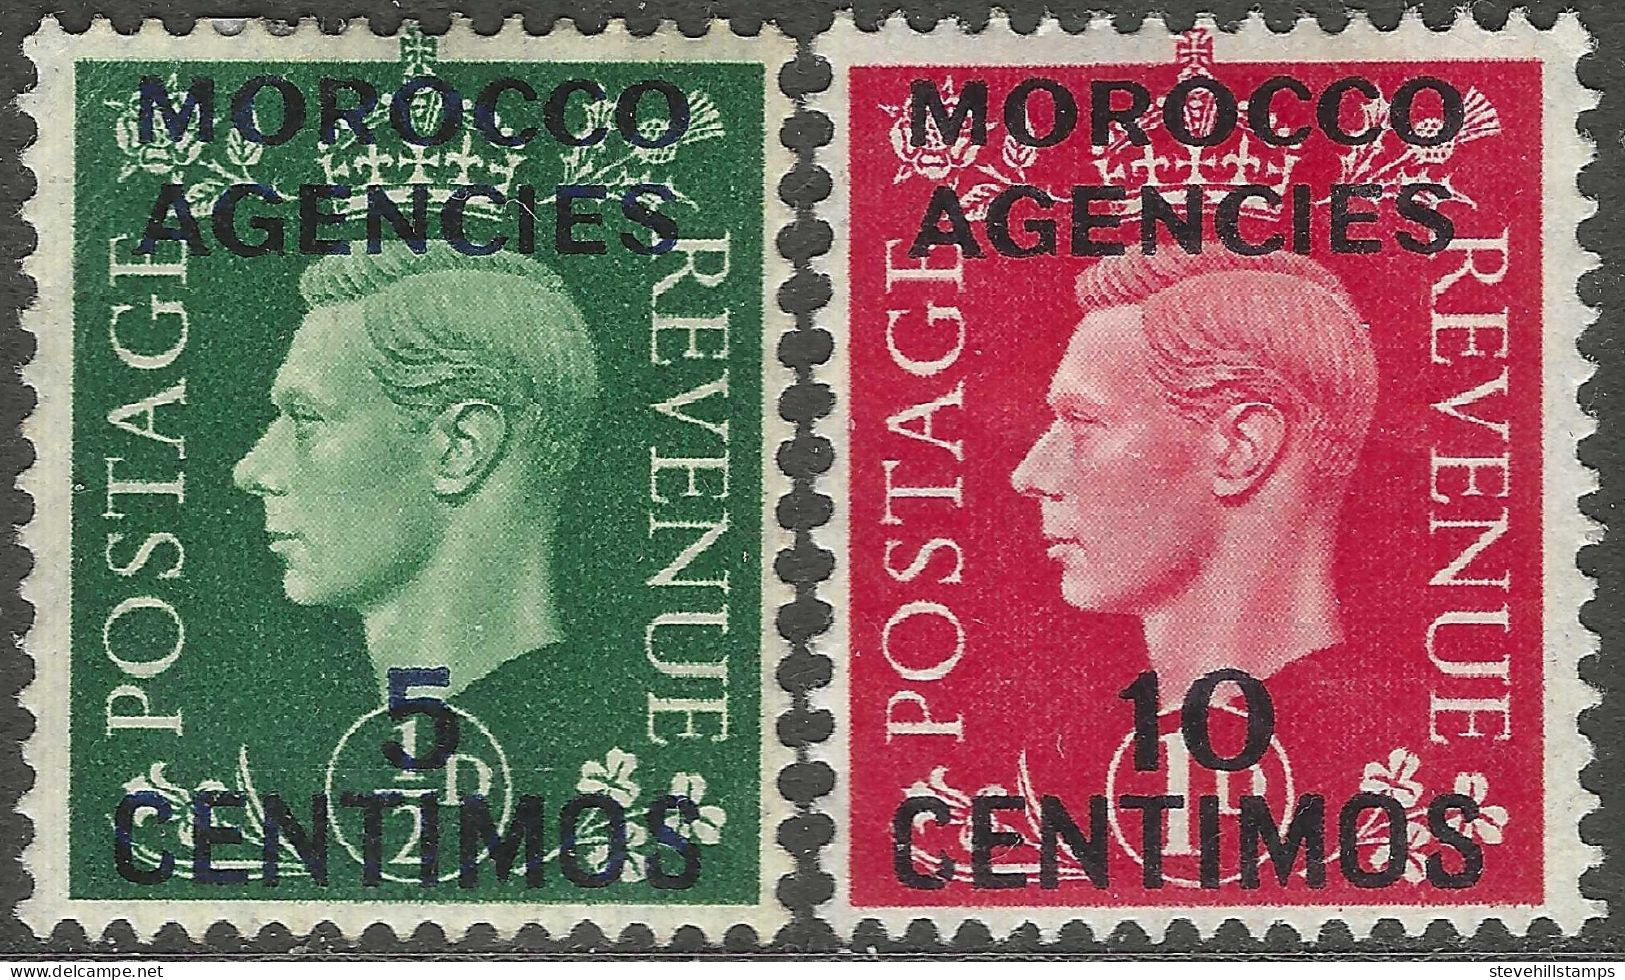 Morocco Agencies (Spanish Currency). 1937-52 KGVI, 5c, 10c MH SG 165, 166. M5081 - Morocco Agencies / Tangier (...-1958)